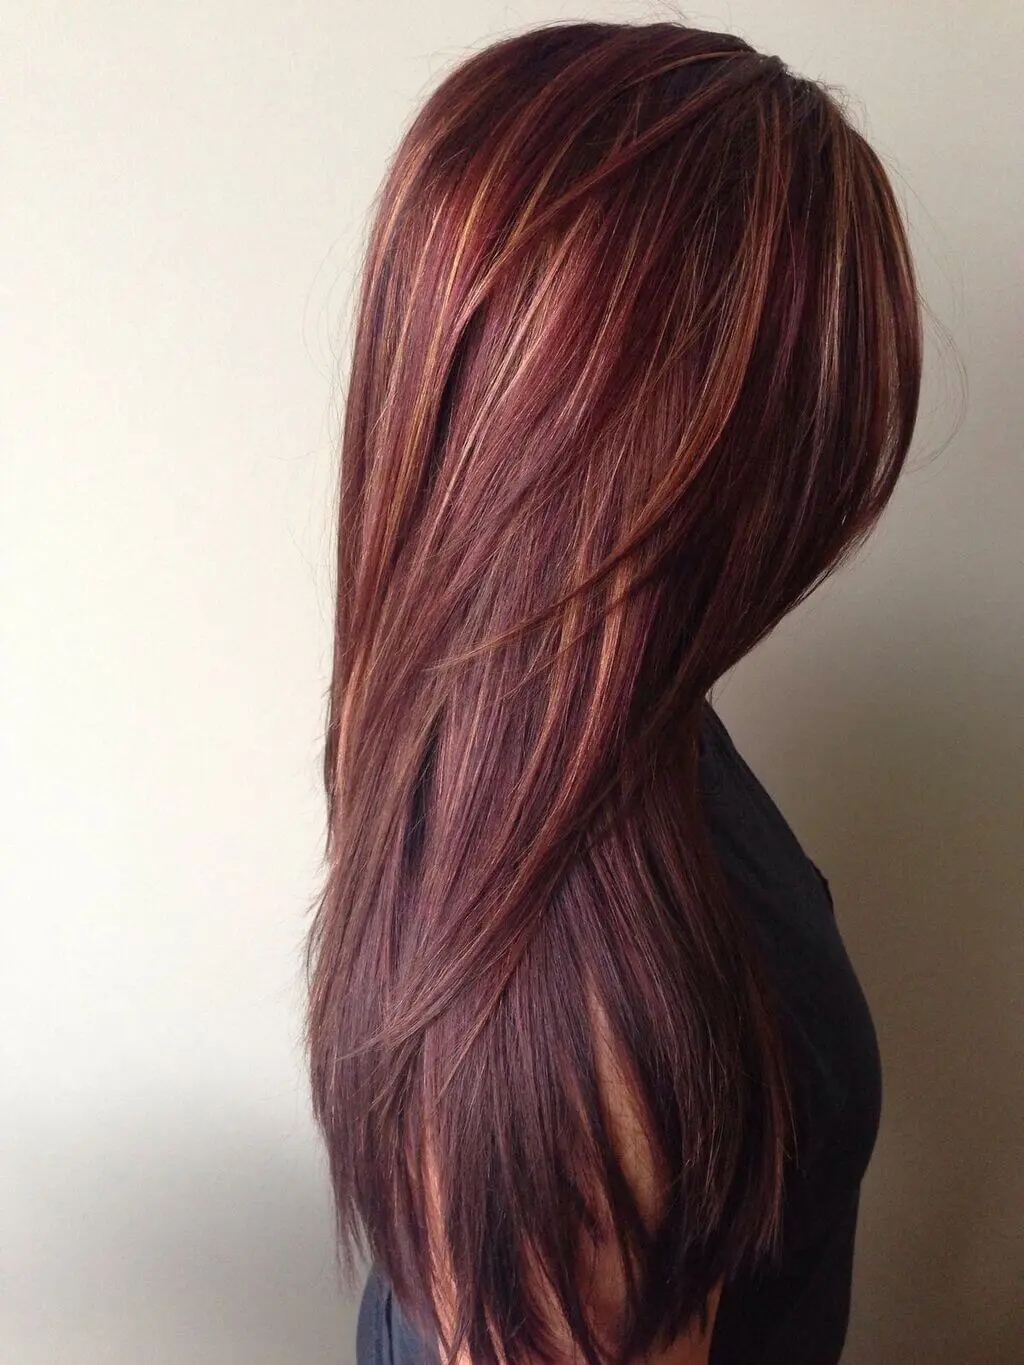 Blonde Highlights with Burgundy Hair Color